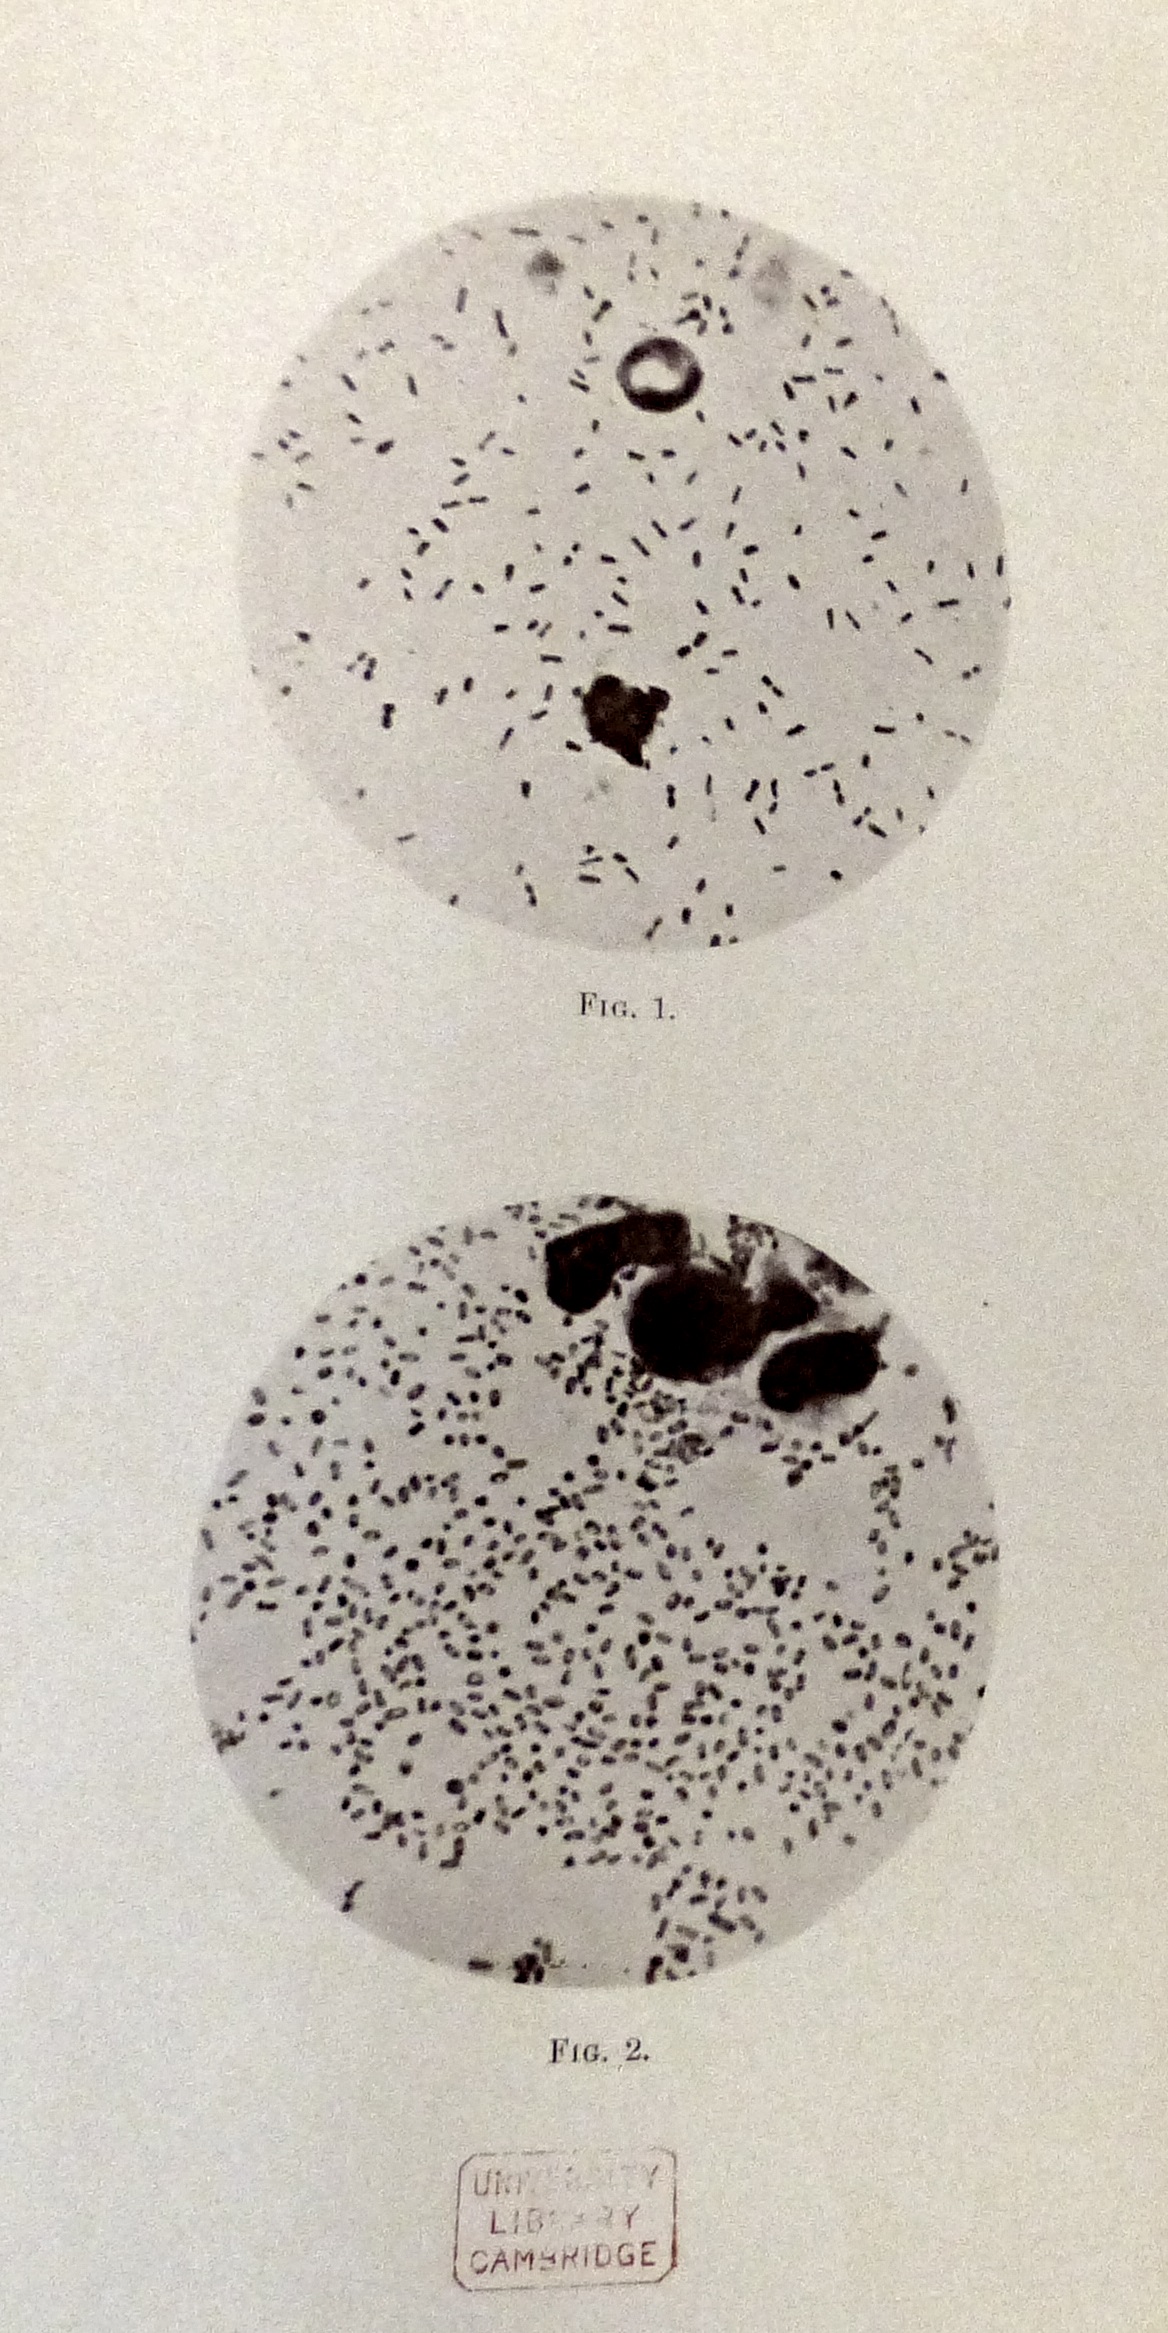 Studies in the bacteriology and etiology of oriental plague. Klein, E. London, New York: Macmillan and co., limited, 1906. Cambridge University Library: 310.c.90.106